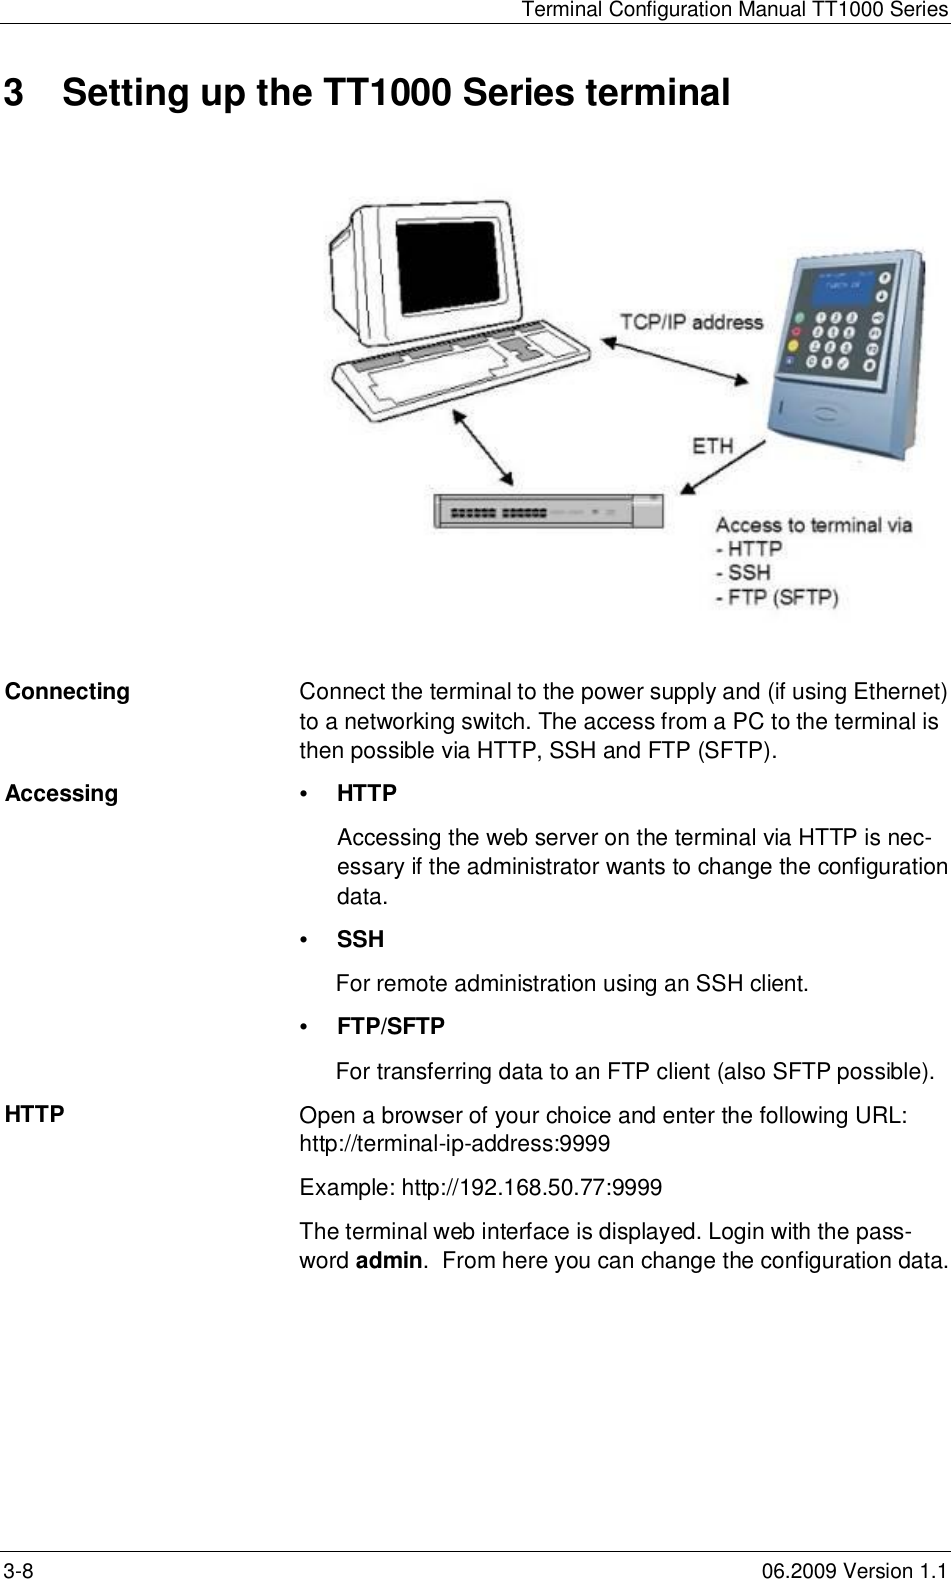 Terminal Configuration Manual TT1000 Series3-8 06.2009 Version 1.13  Setting up the TT1000 Series terminalConnecting Connect the terminal to the power supply and (if using Ethernet)to a networking switch. The access from a PC to the terminal isthen possible via HTTP, SSH and FTP (SFTP).Accessing •HTTPAccessing the web server on the terminal via HTTP is nec-essary if the administrator wants to change the configurationdata.•SSHFor remote administration using an SSH client.•FTP/SFTPFor transferring data to an FTP client (also SFTP possible).HTTP Open a browser of your choice and enter the following URL:http://terminal-ip-address:9999Example: http://192.168.50.77:9999The terminal web interface is displayed. Login with the pass-word admin.  From here you can change the configuration data.